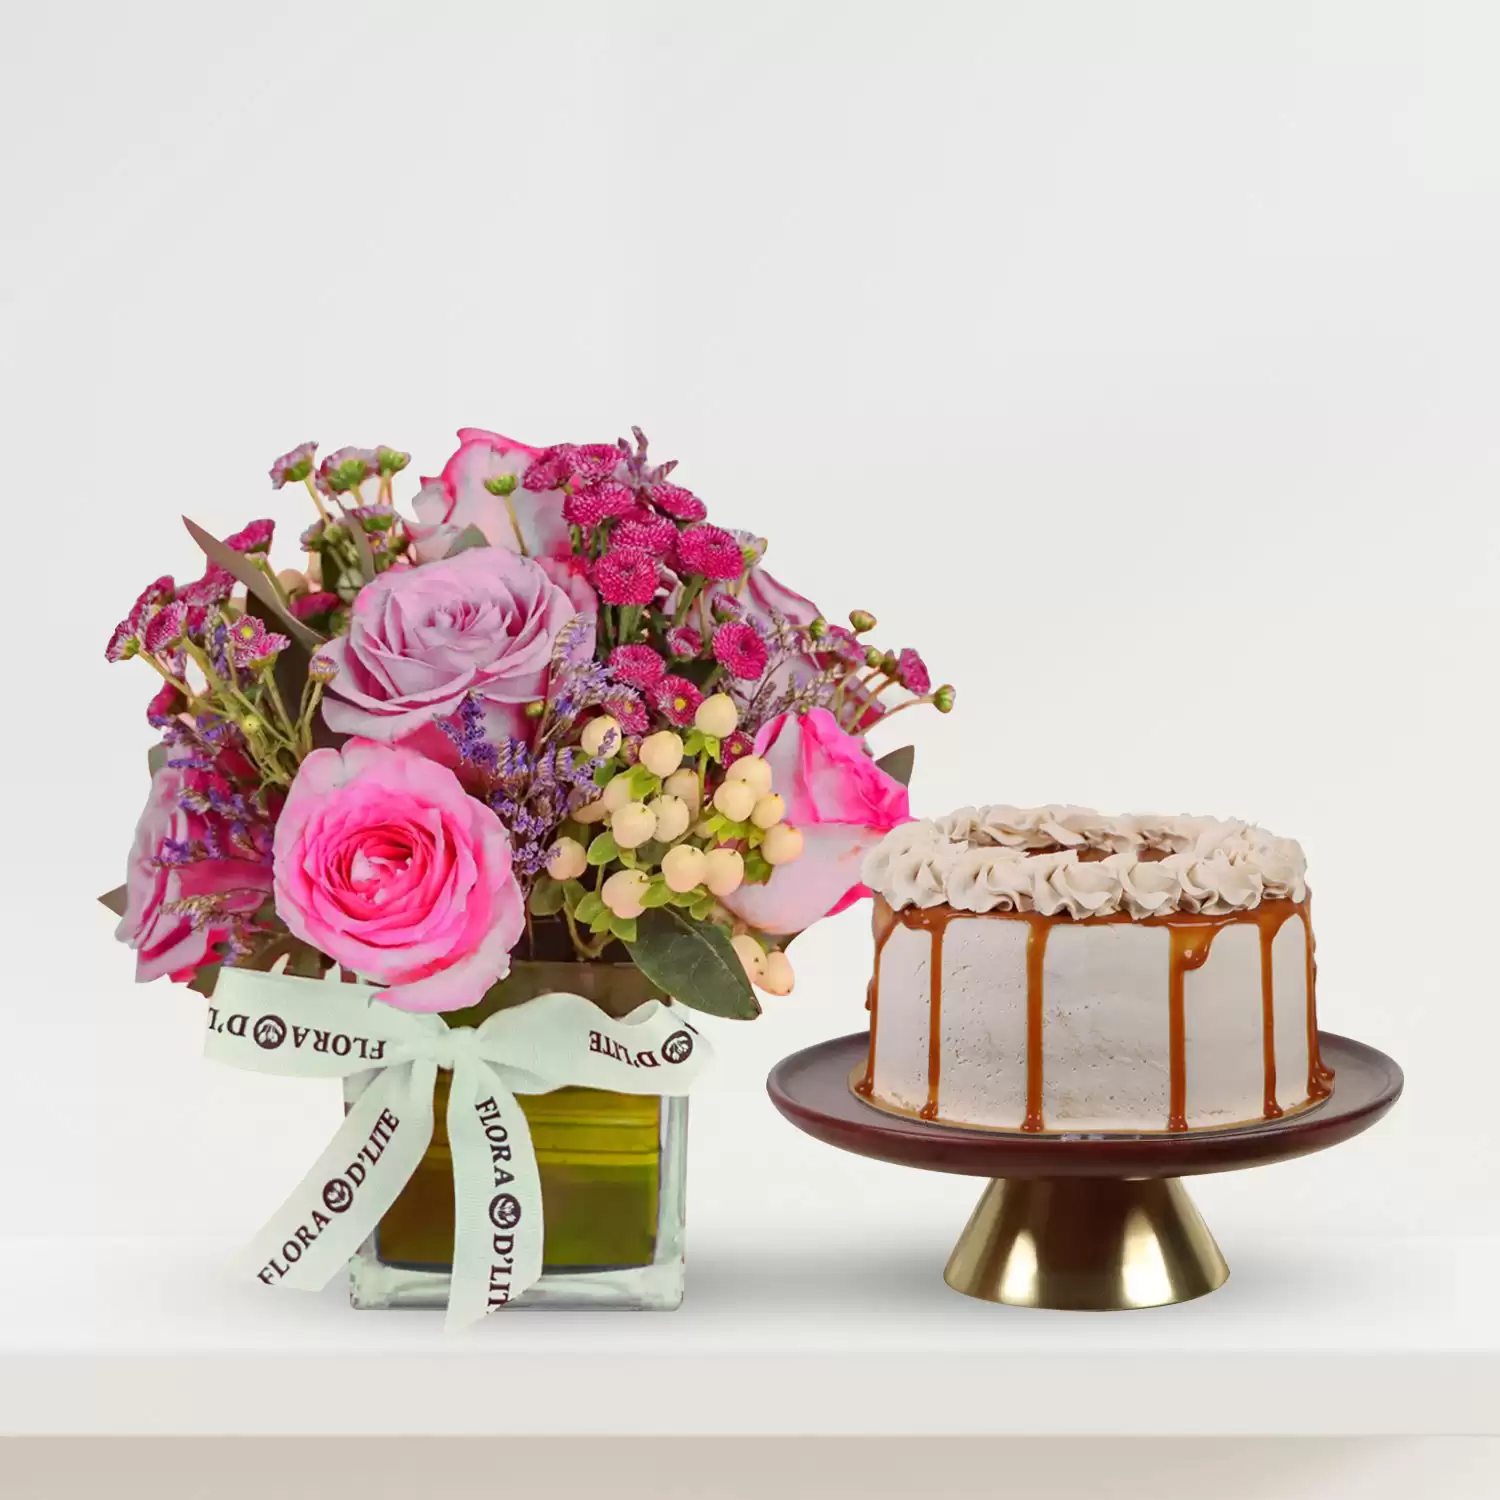 Pink Grace & Caramel Cake | Order Flowers And Cakes Online In Bahrain - Flora D'lite